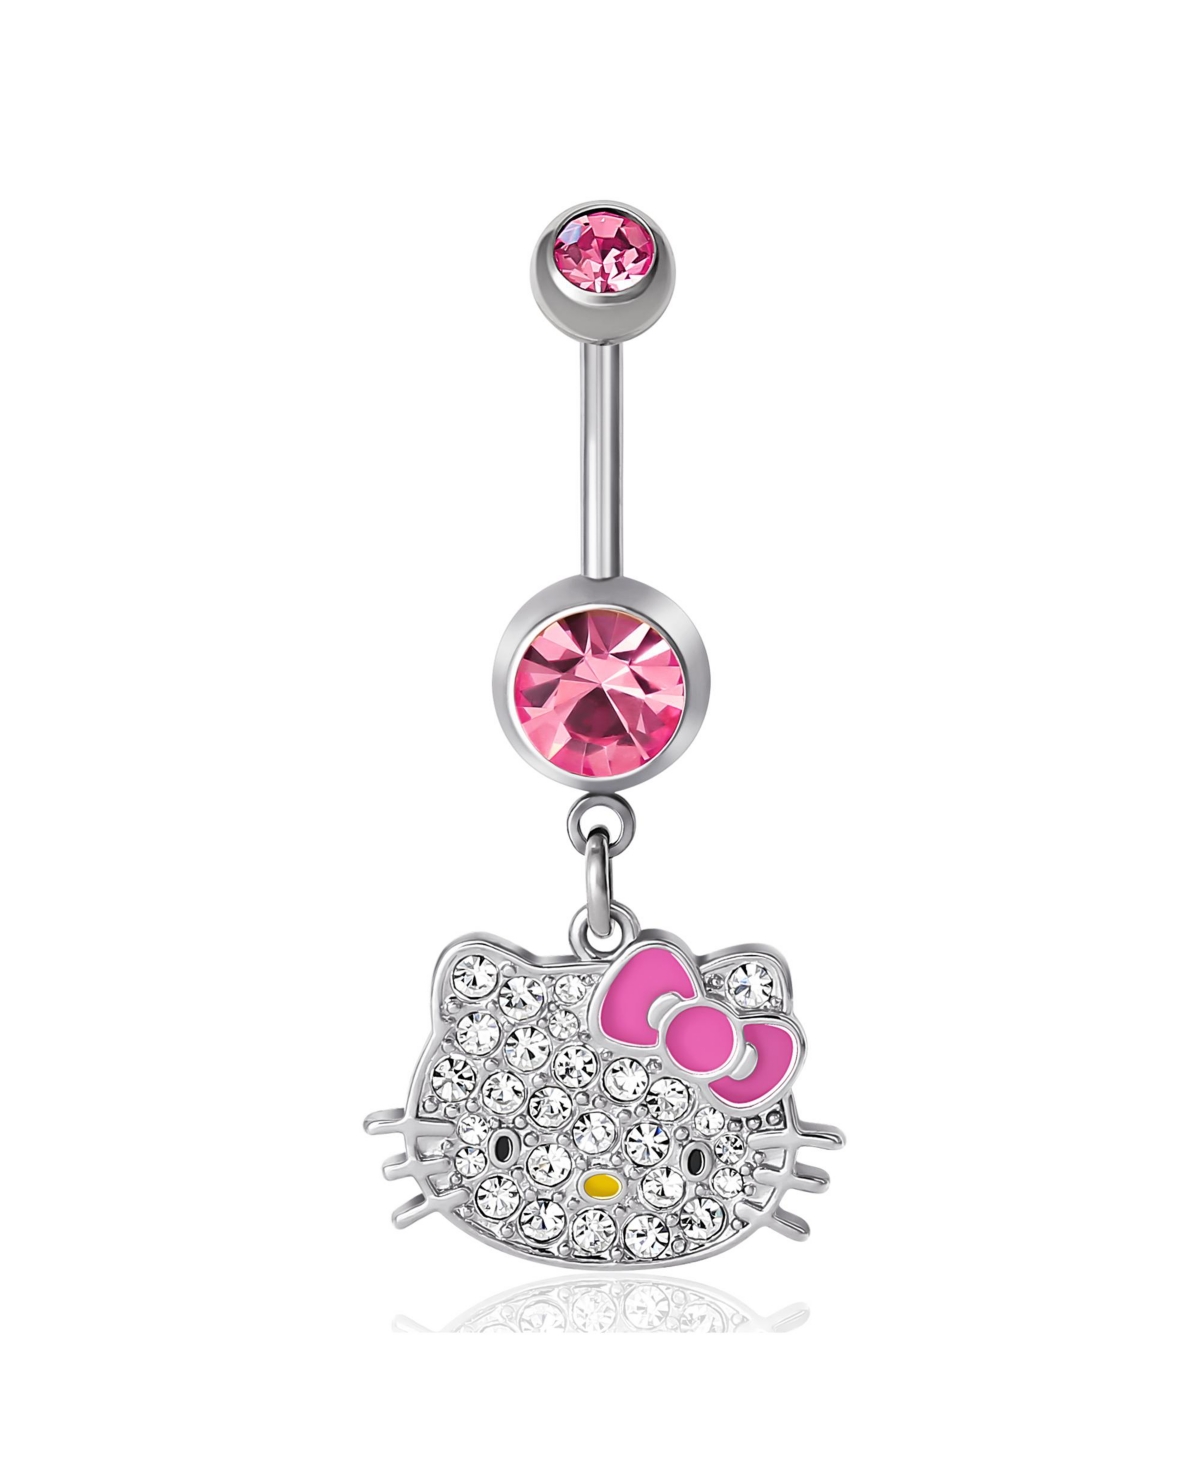 Sanrio 14G Stainless Steel (316L) Piercing Element Dangle Belly Button Ring - Pink Crystal - Silver tone, pink